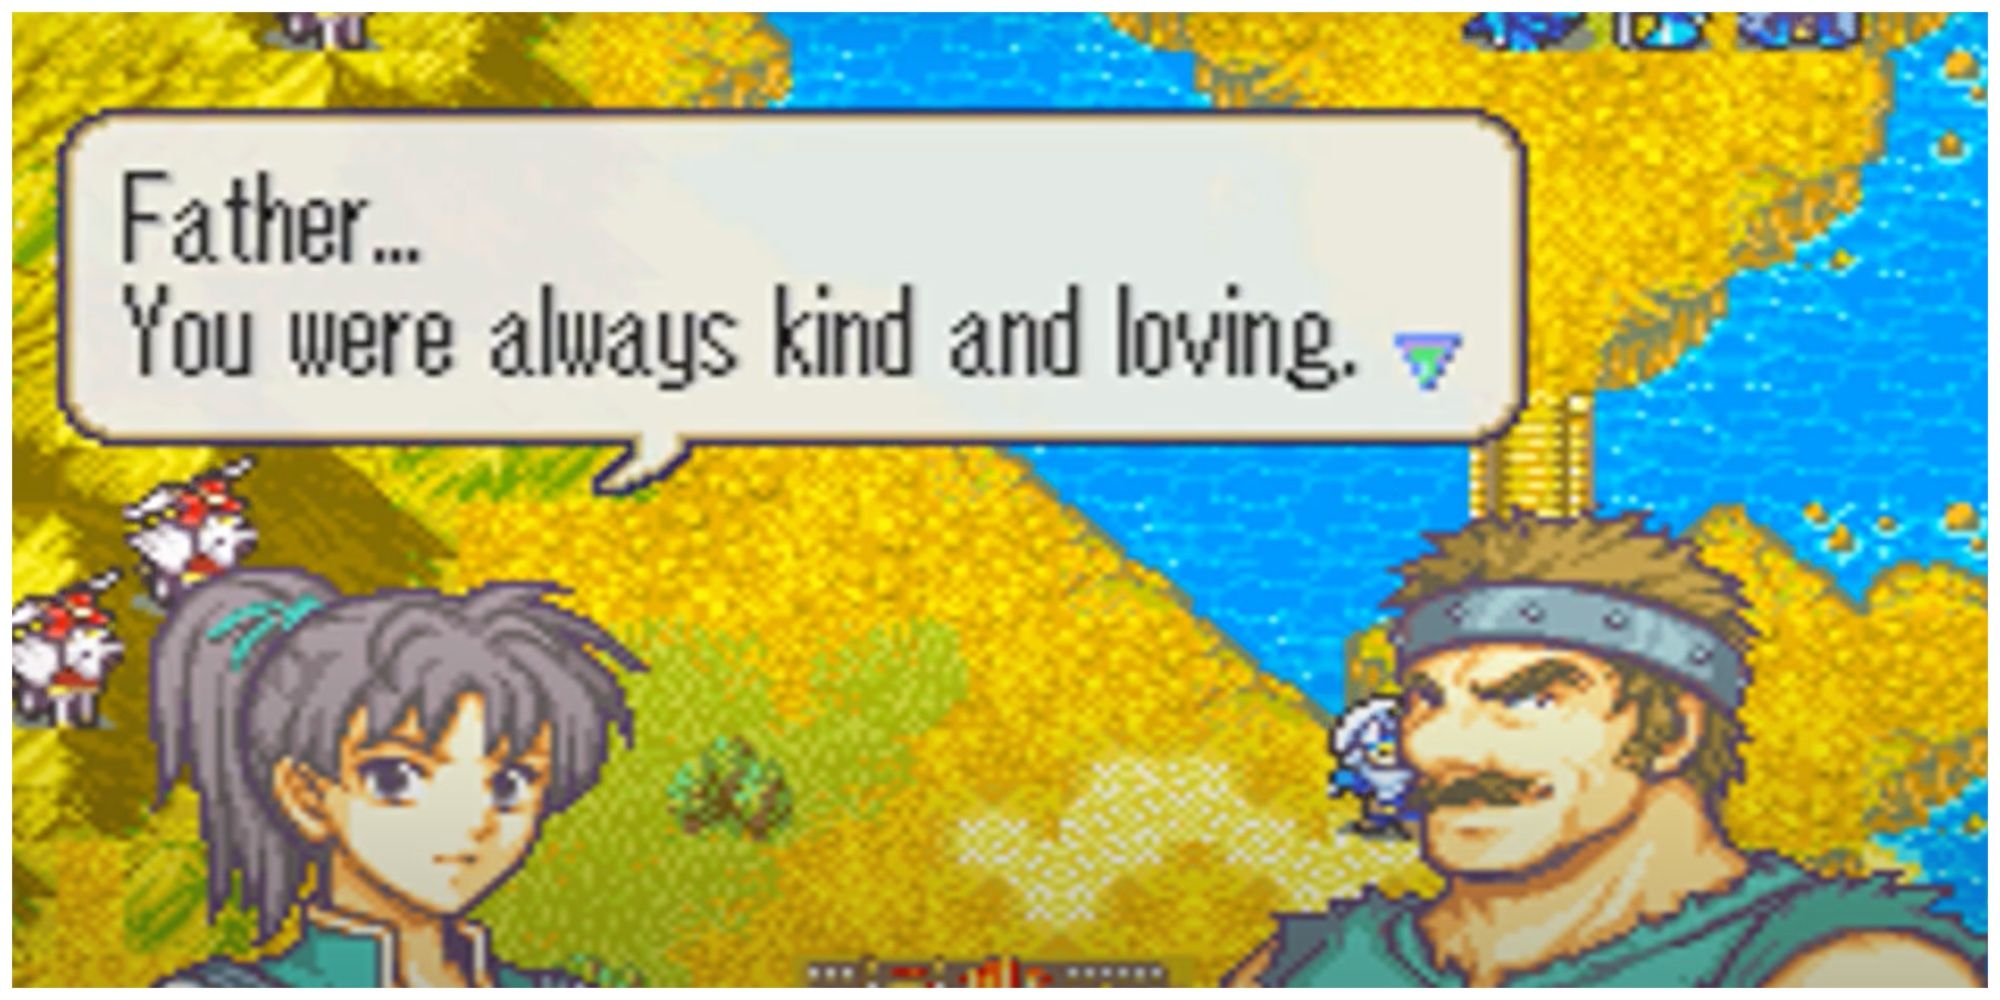 Fir talking to Bartre; "Father... you were always kind and loving."